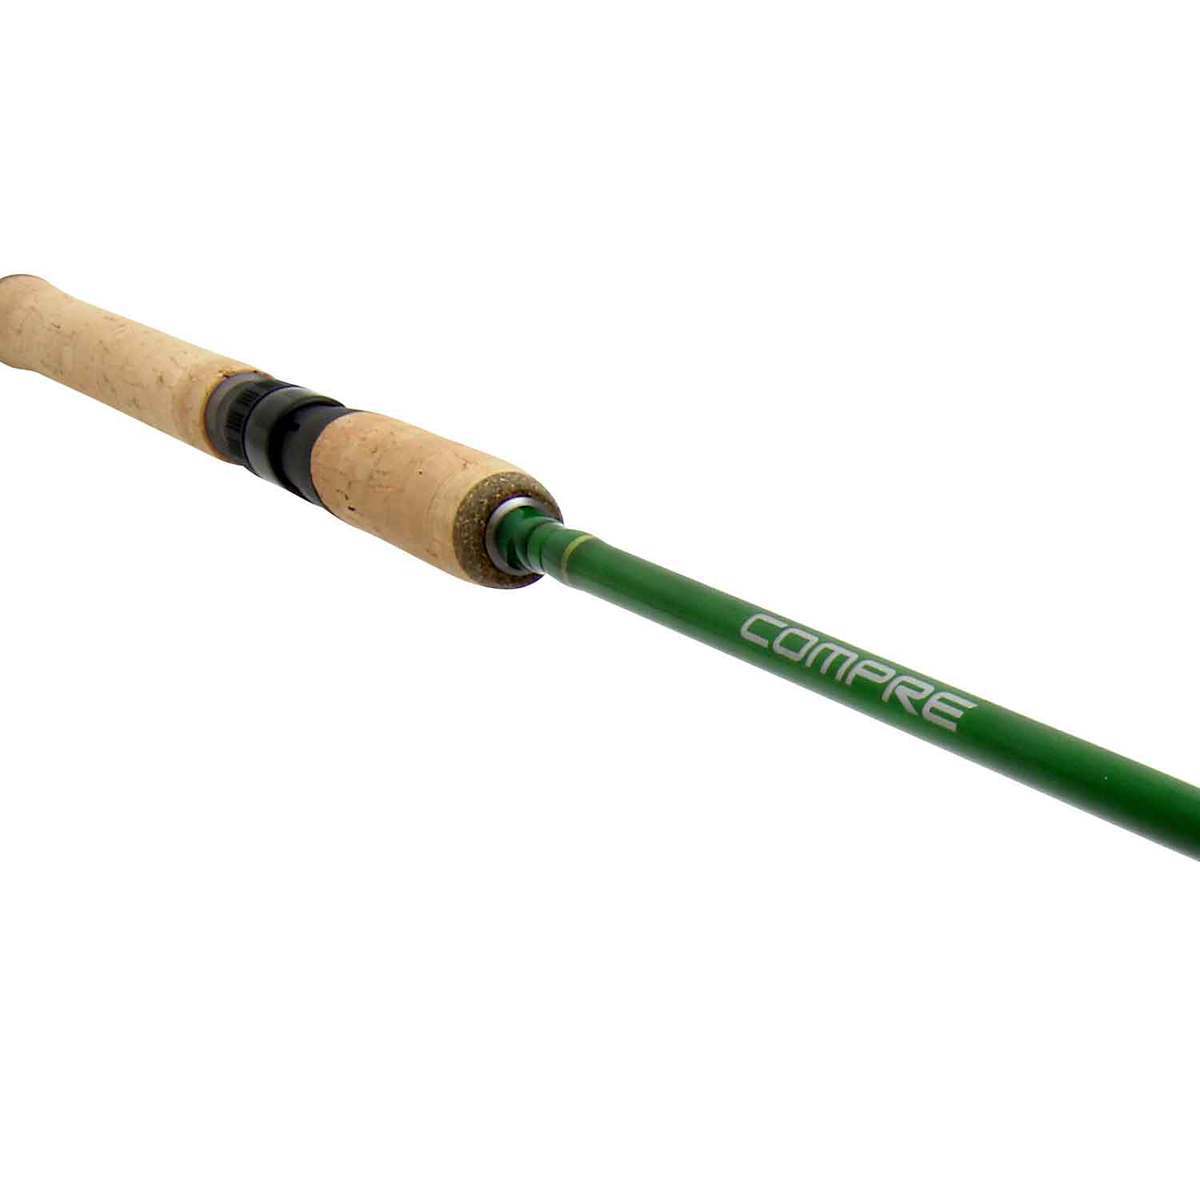 Shimano Compre Walleye Spinning Rod - CPSWX68MH2D